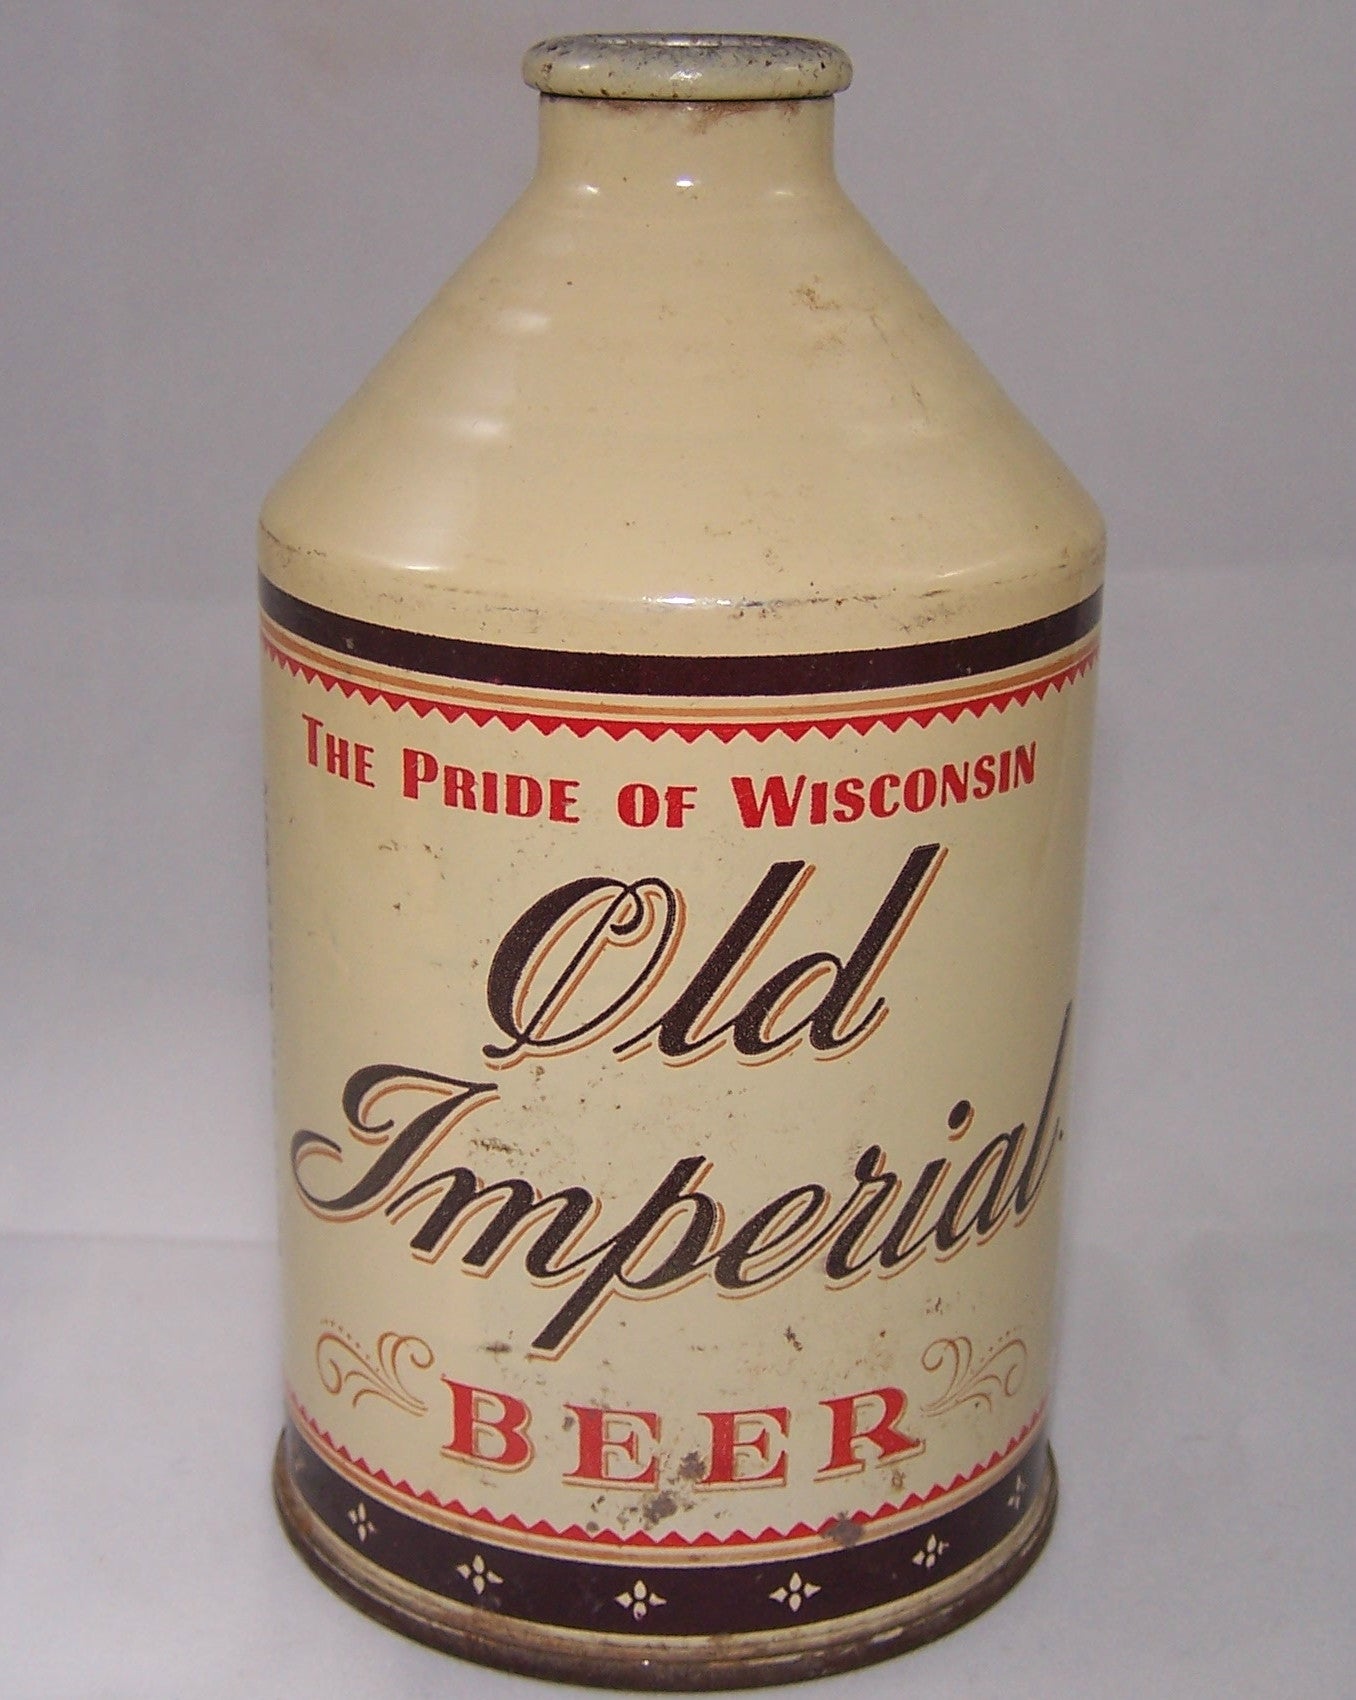 Old Imperial Beer, USBC 197-21, Grade 1/1- Sold 9/3/15